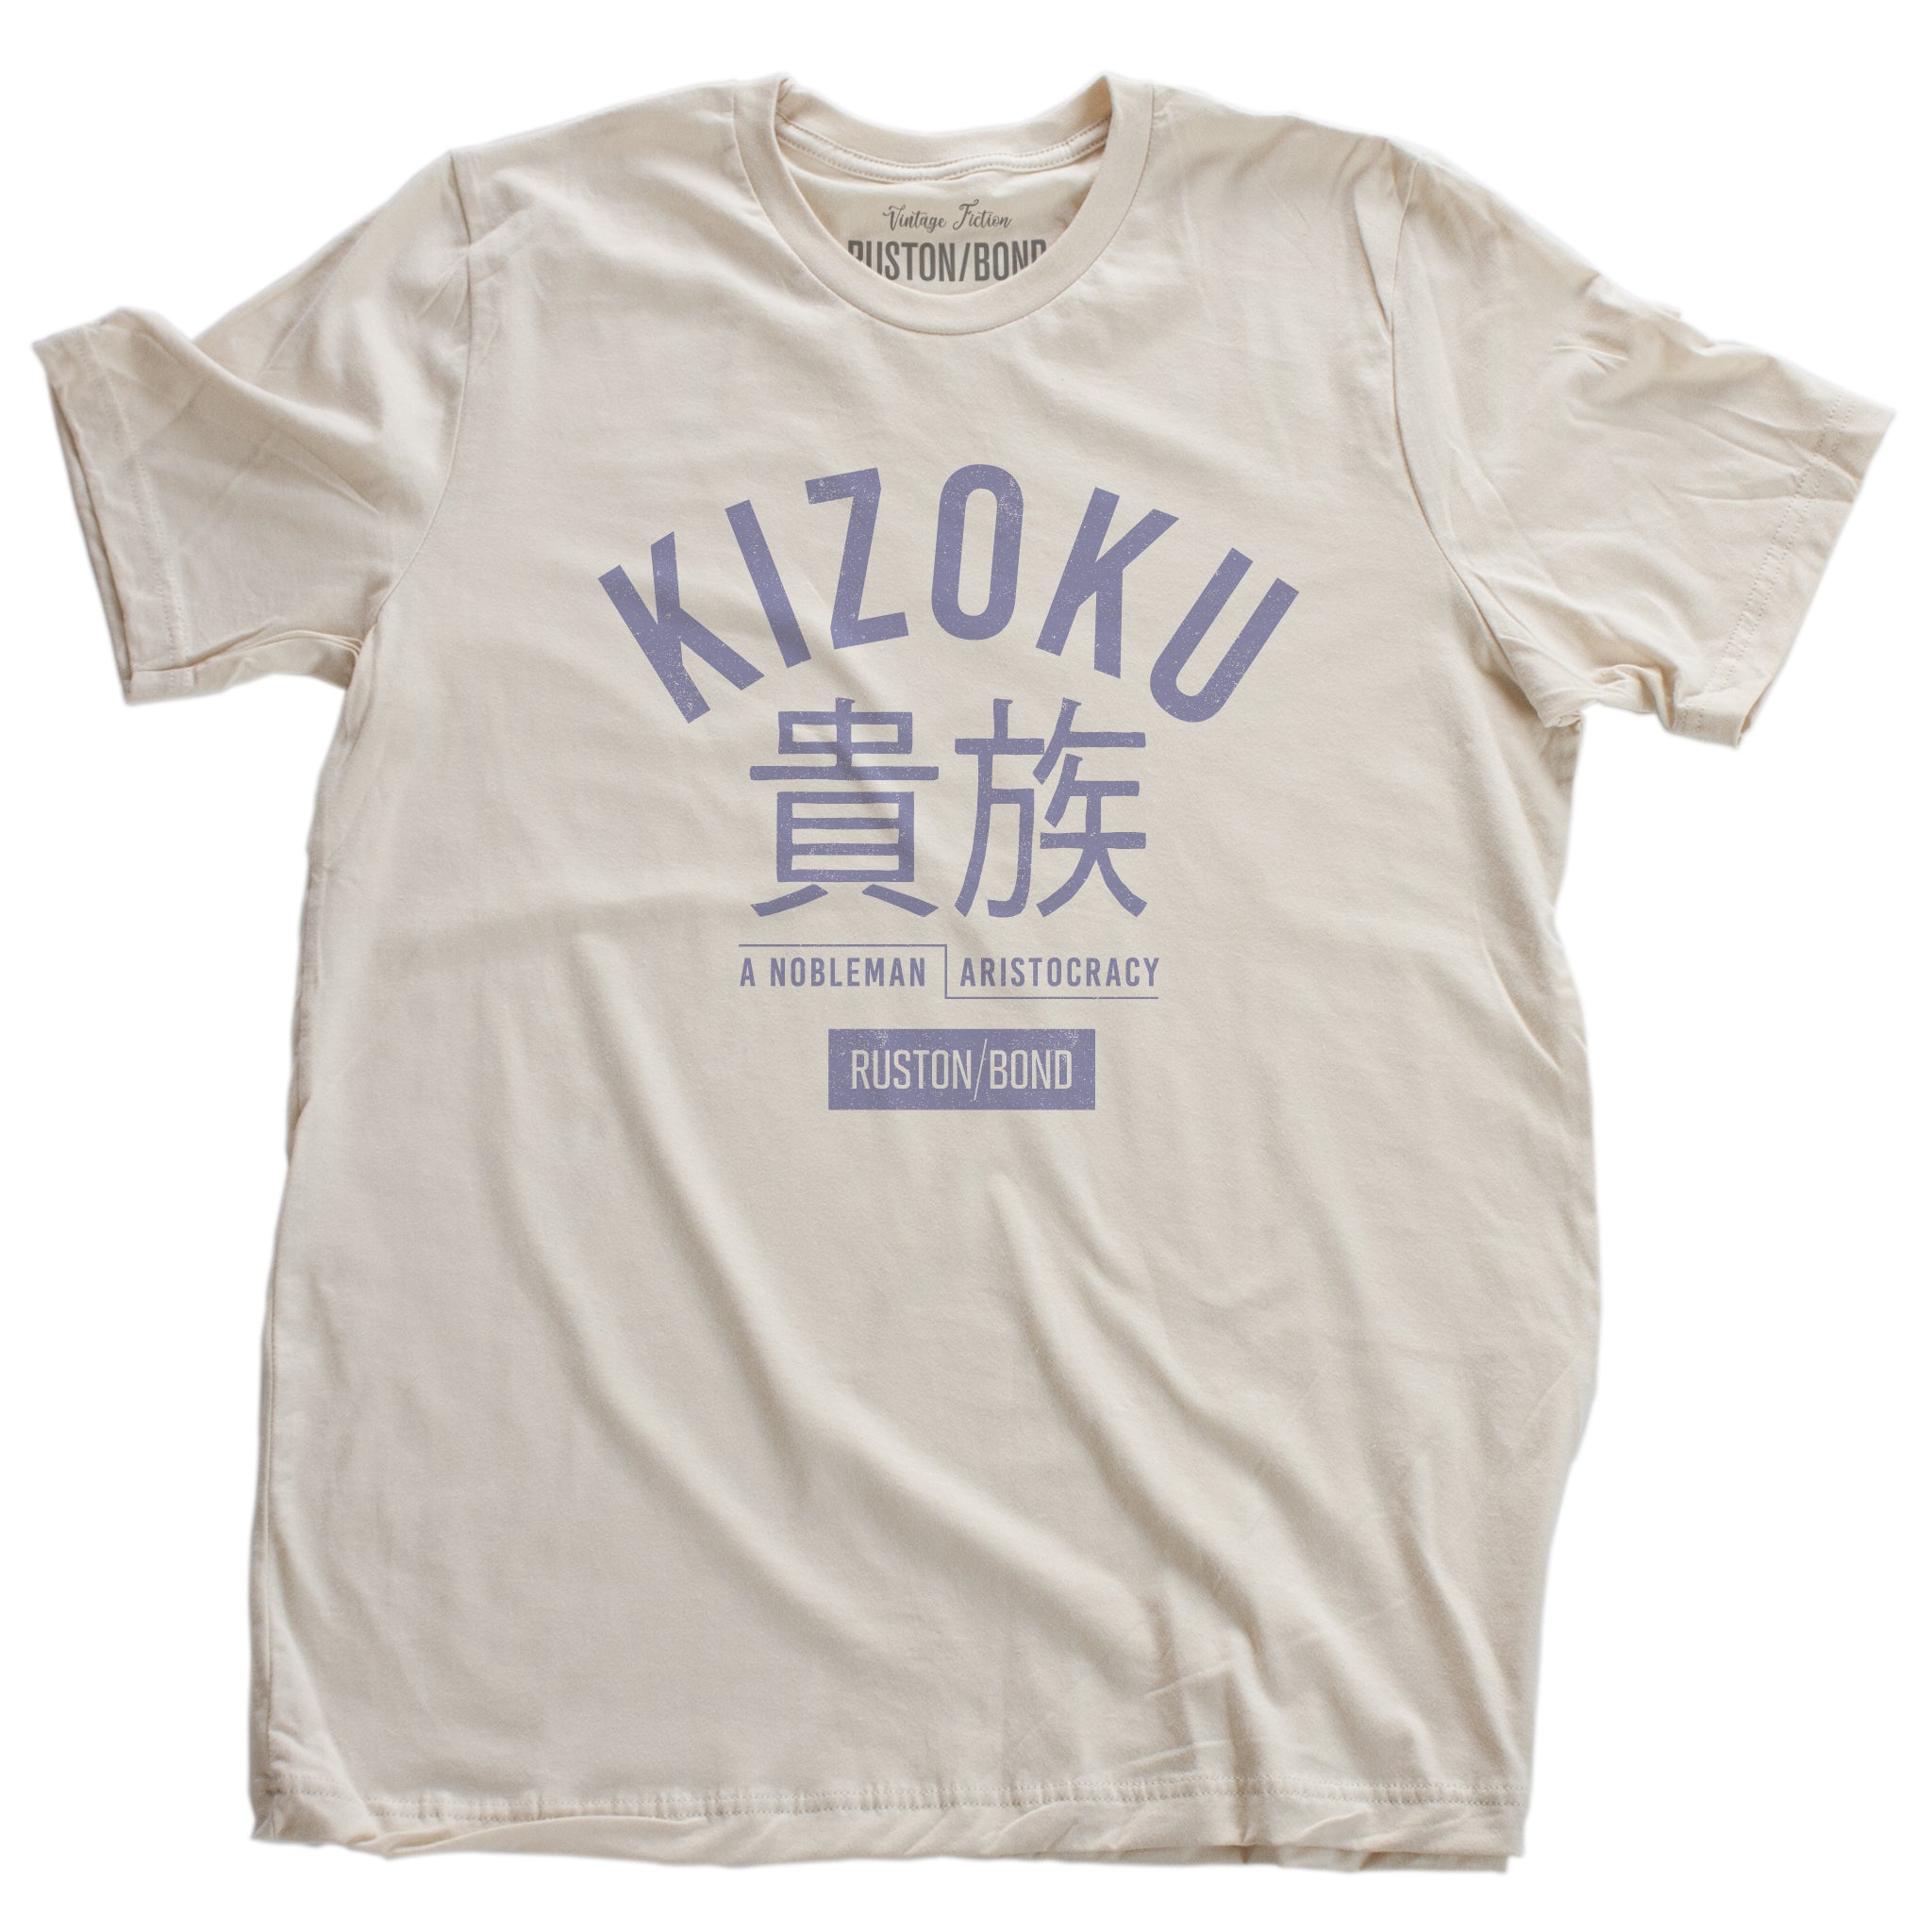 A retro fashion t-shirt in Soft Cream with the bold typographic of the Japanese word “KIZOKU” and “a nobleman / aristocracy” below the Japanese characters. By the fashion brand Ruston/Bond, from wolfsaint.net. 